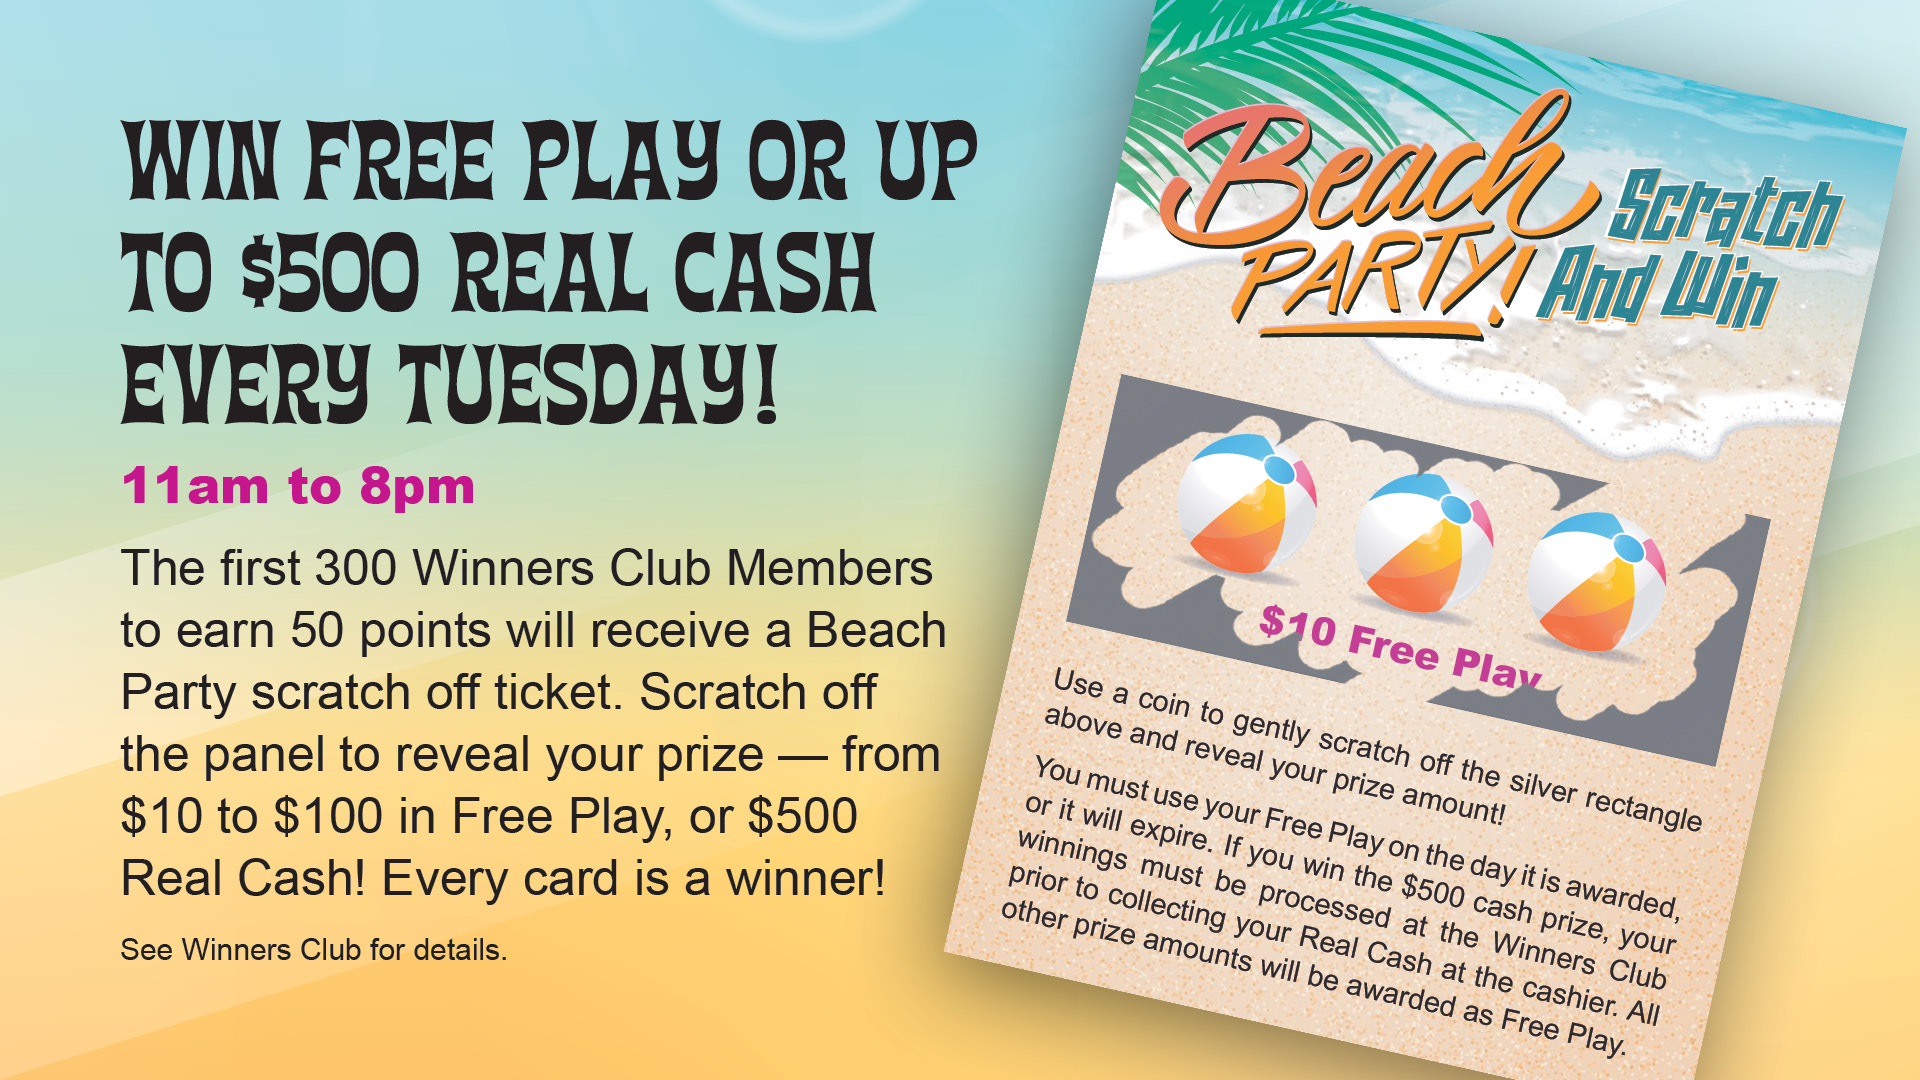 Beach Party - Scratch and Win. Win free play or up to $500 real cash every Tuesday! 11 am to 8pm. The first 300 Winners Club members to earn 50 points will receive a Beach Party scratch off ticket. Scratch off the panel to reveal your prize - from $10 to $100 in free play, or $500 real cash! Every card is a winner! See Winners Club for details.